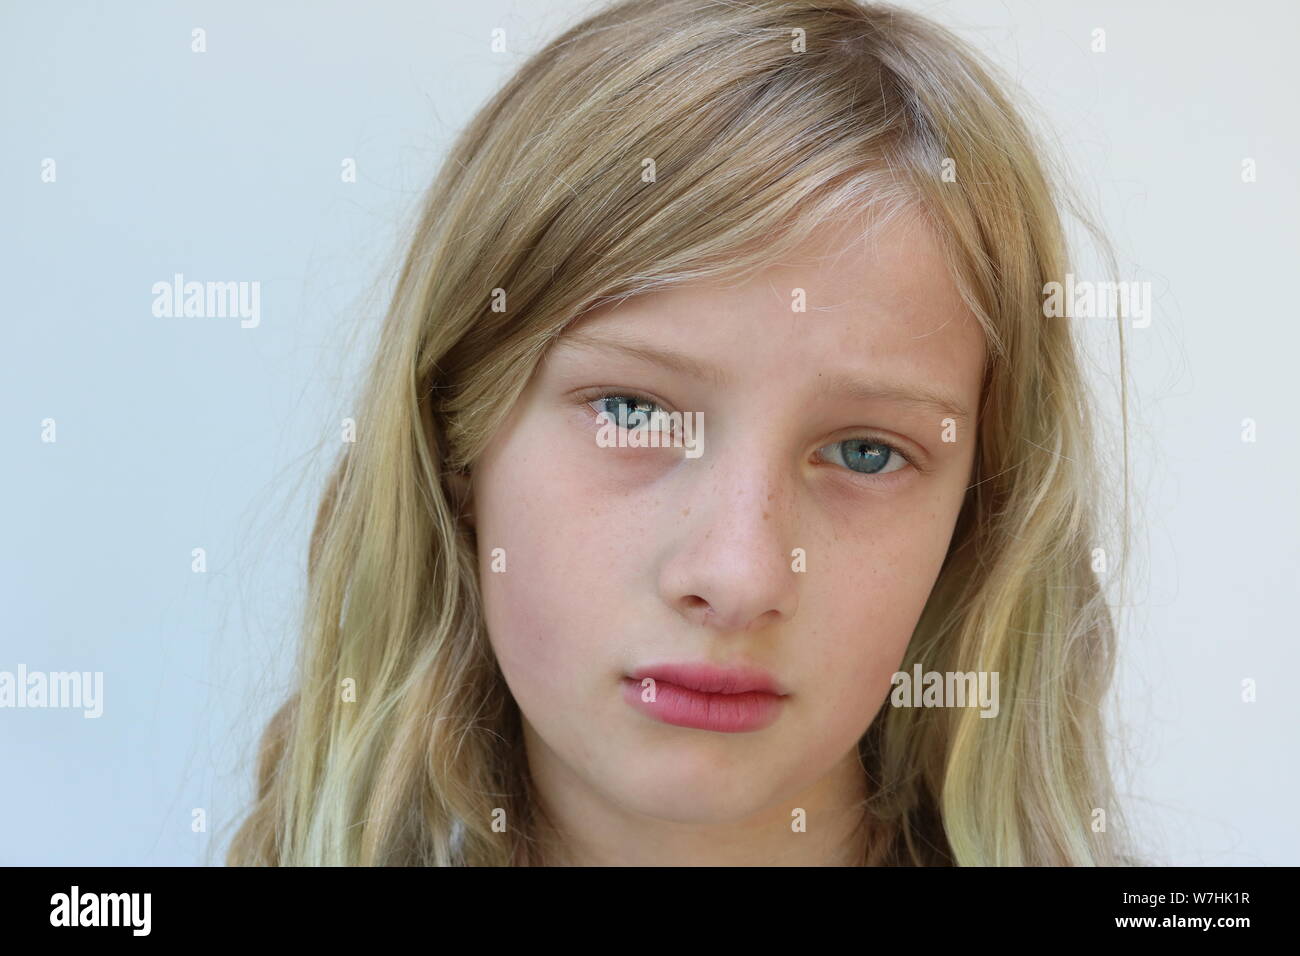 Portrait of a beautiful blond preteen heartbroken girl against a white background Stock Photo